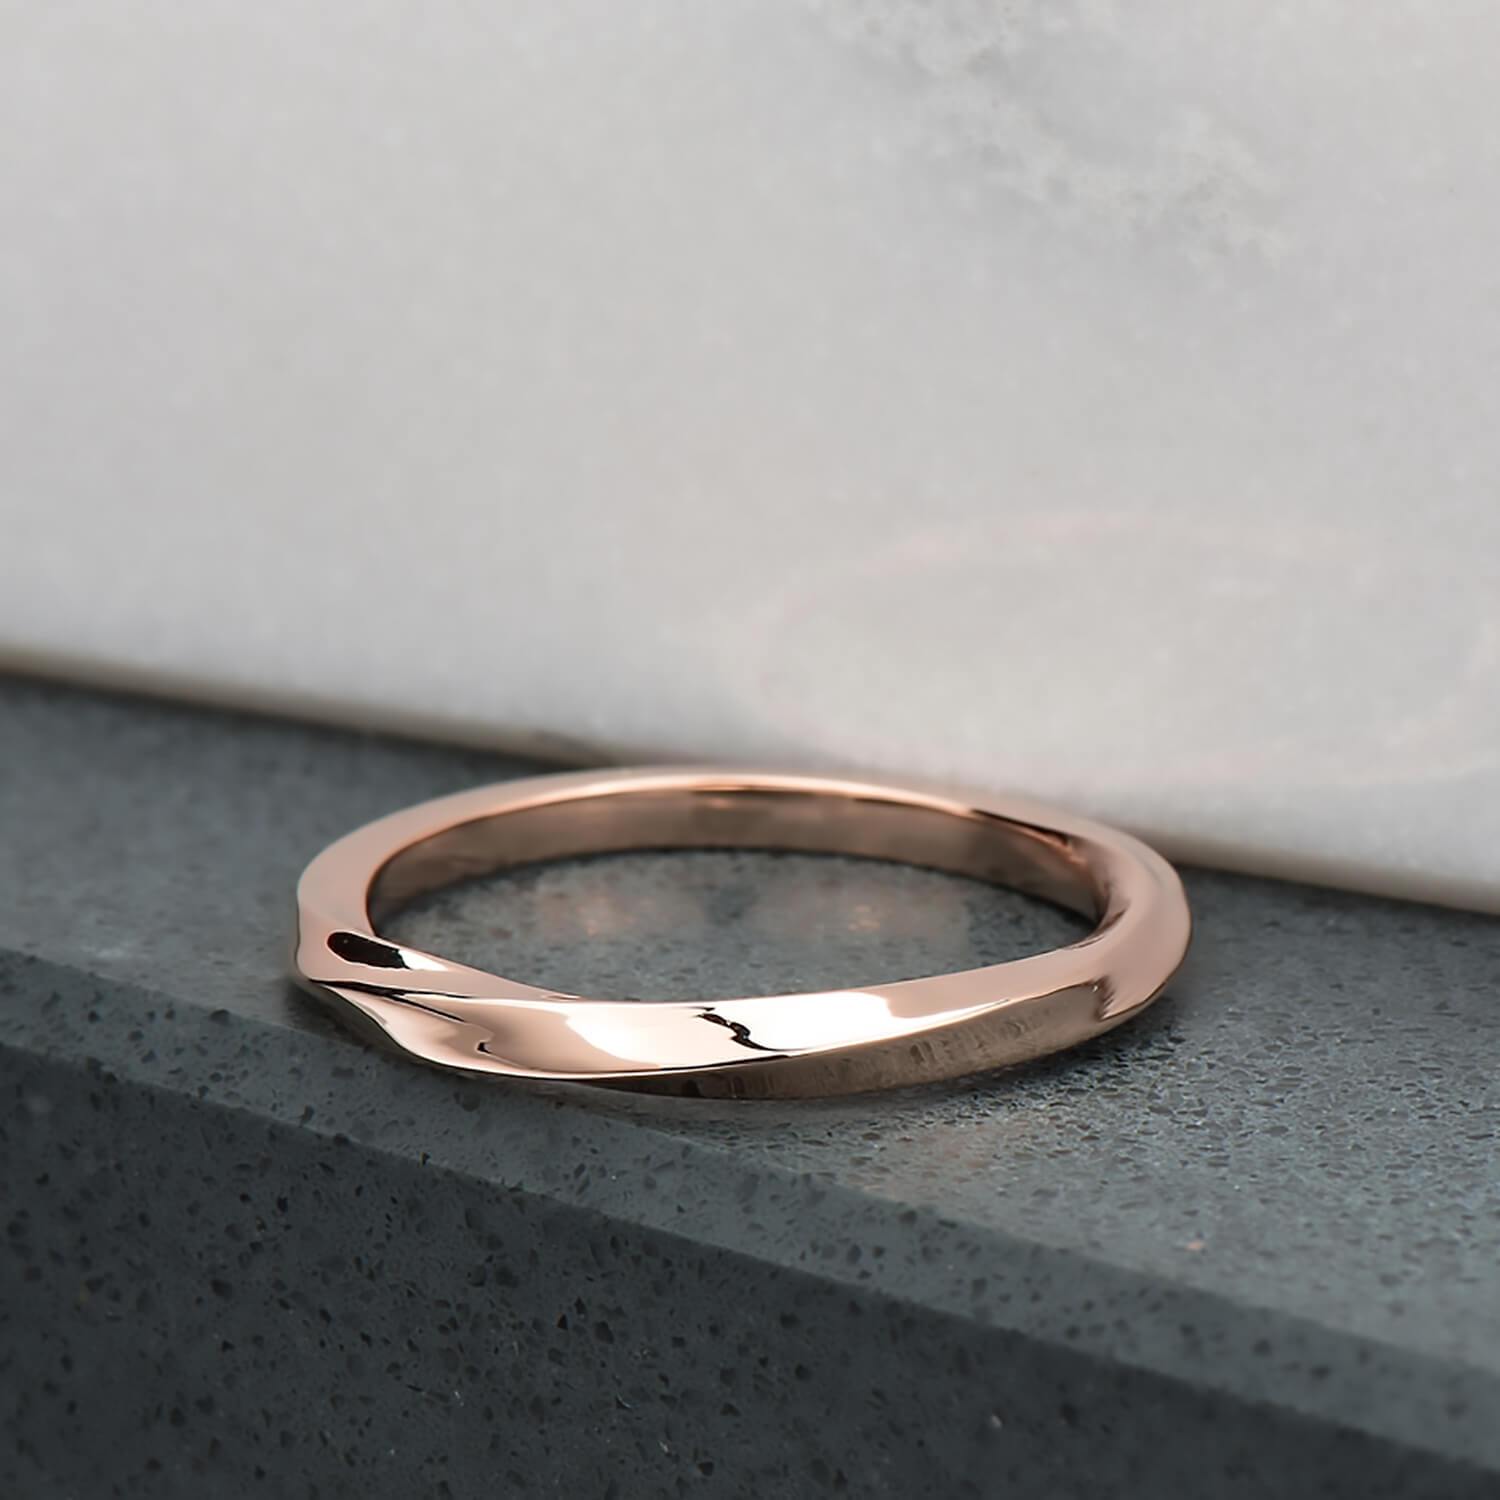 Recycled 10 karat rose gold with a half twist, the ring is 2mm in its width & thickness. It has been finished with a high mirror polish.